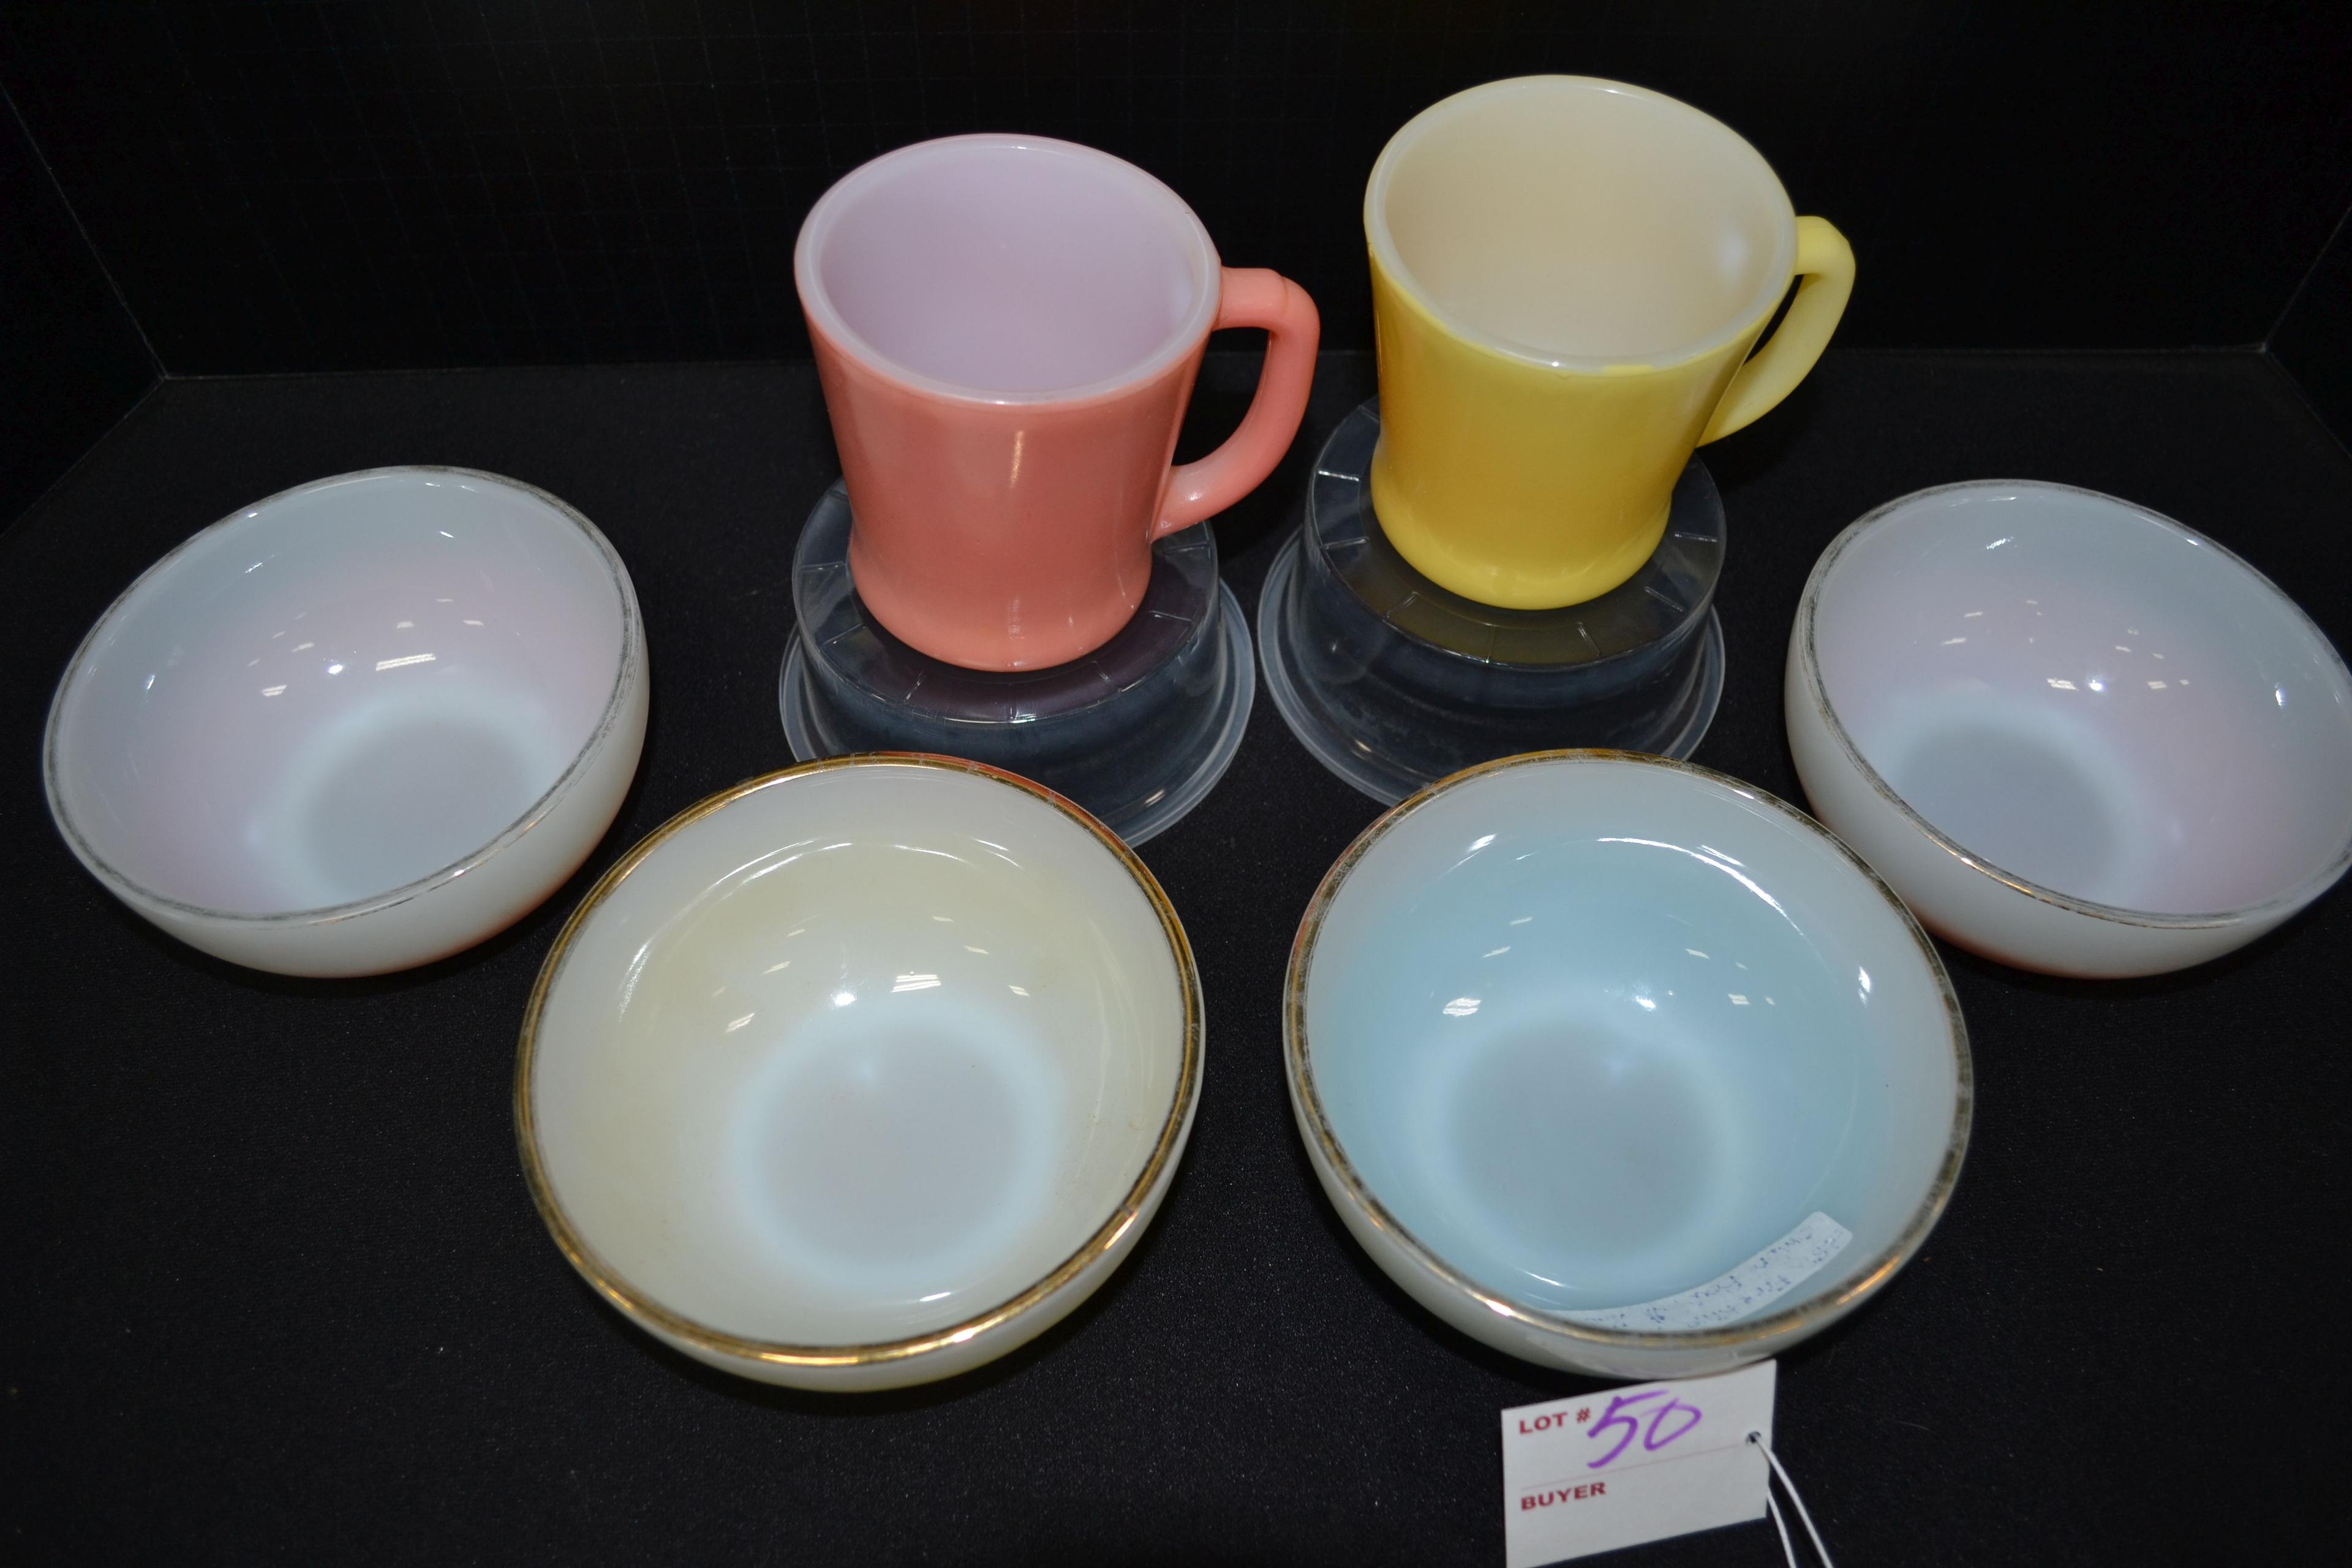 Pair of Fire-King Coffee Cups and 4 Pastel Fire-King Cereal Bowls